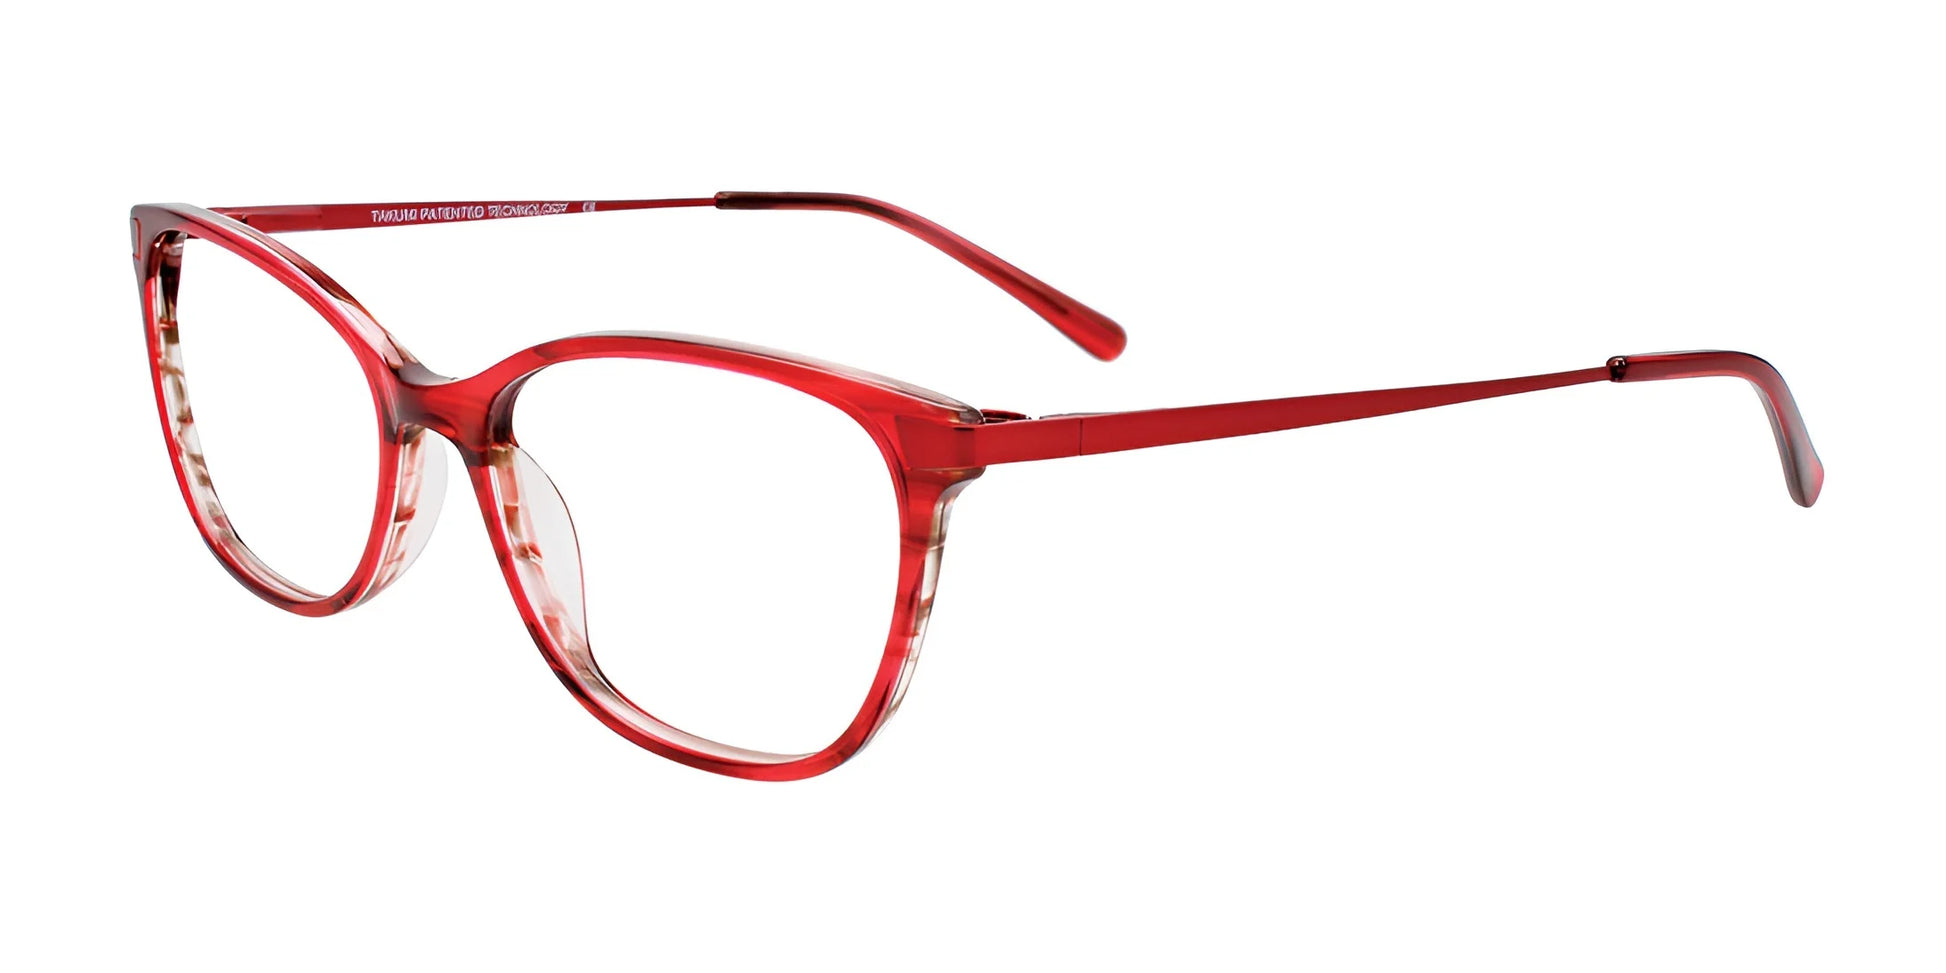 Takumi TK1183 Eyeglasses with Clip-on Sunglasses Red Brown Stripes / Satin Red